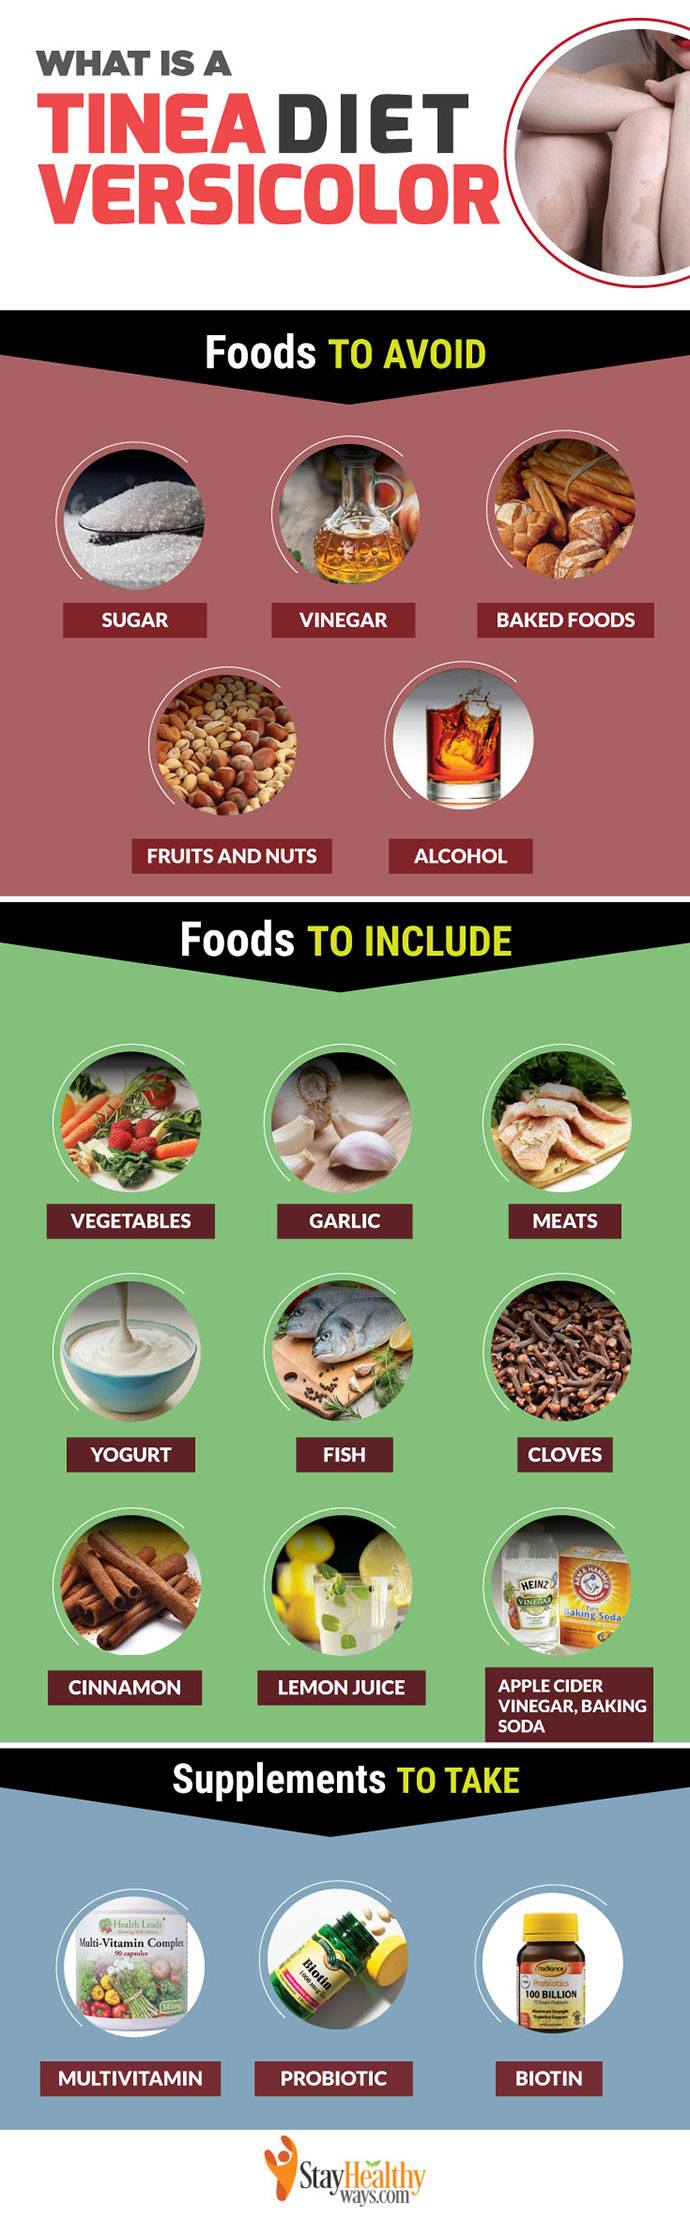 What Is a Tinea Versicolor Diet infographic